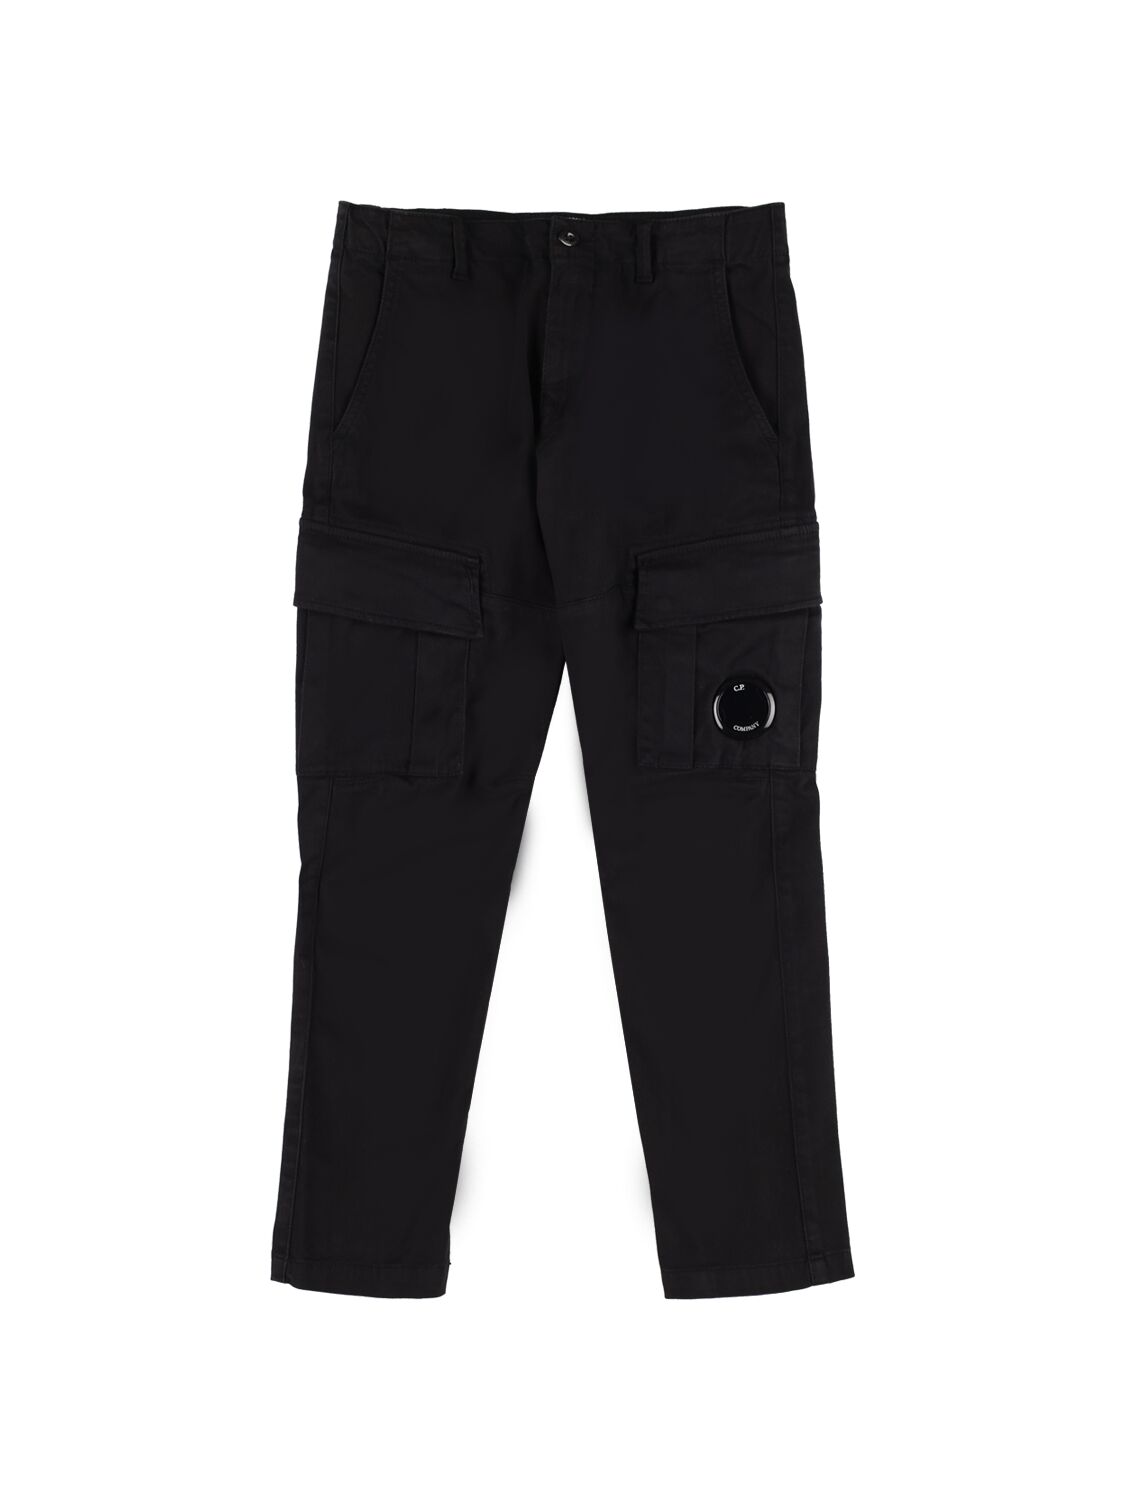 Image of Stretch Satin Cargo Pants